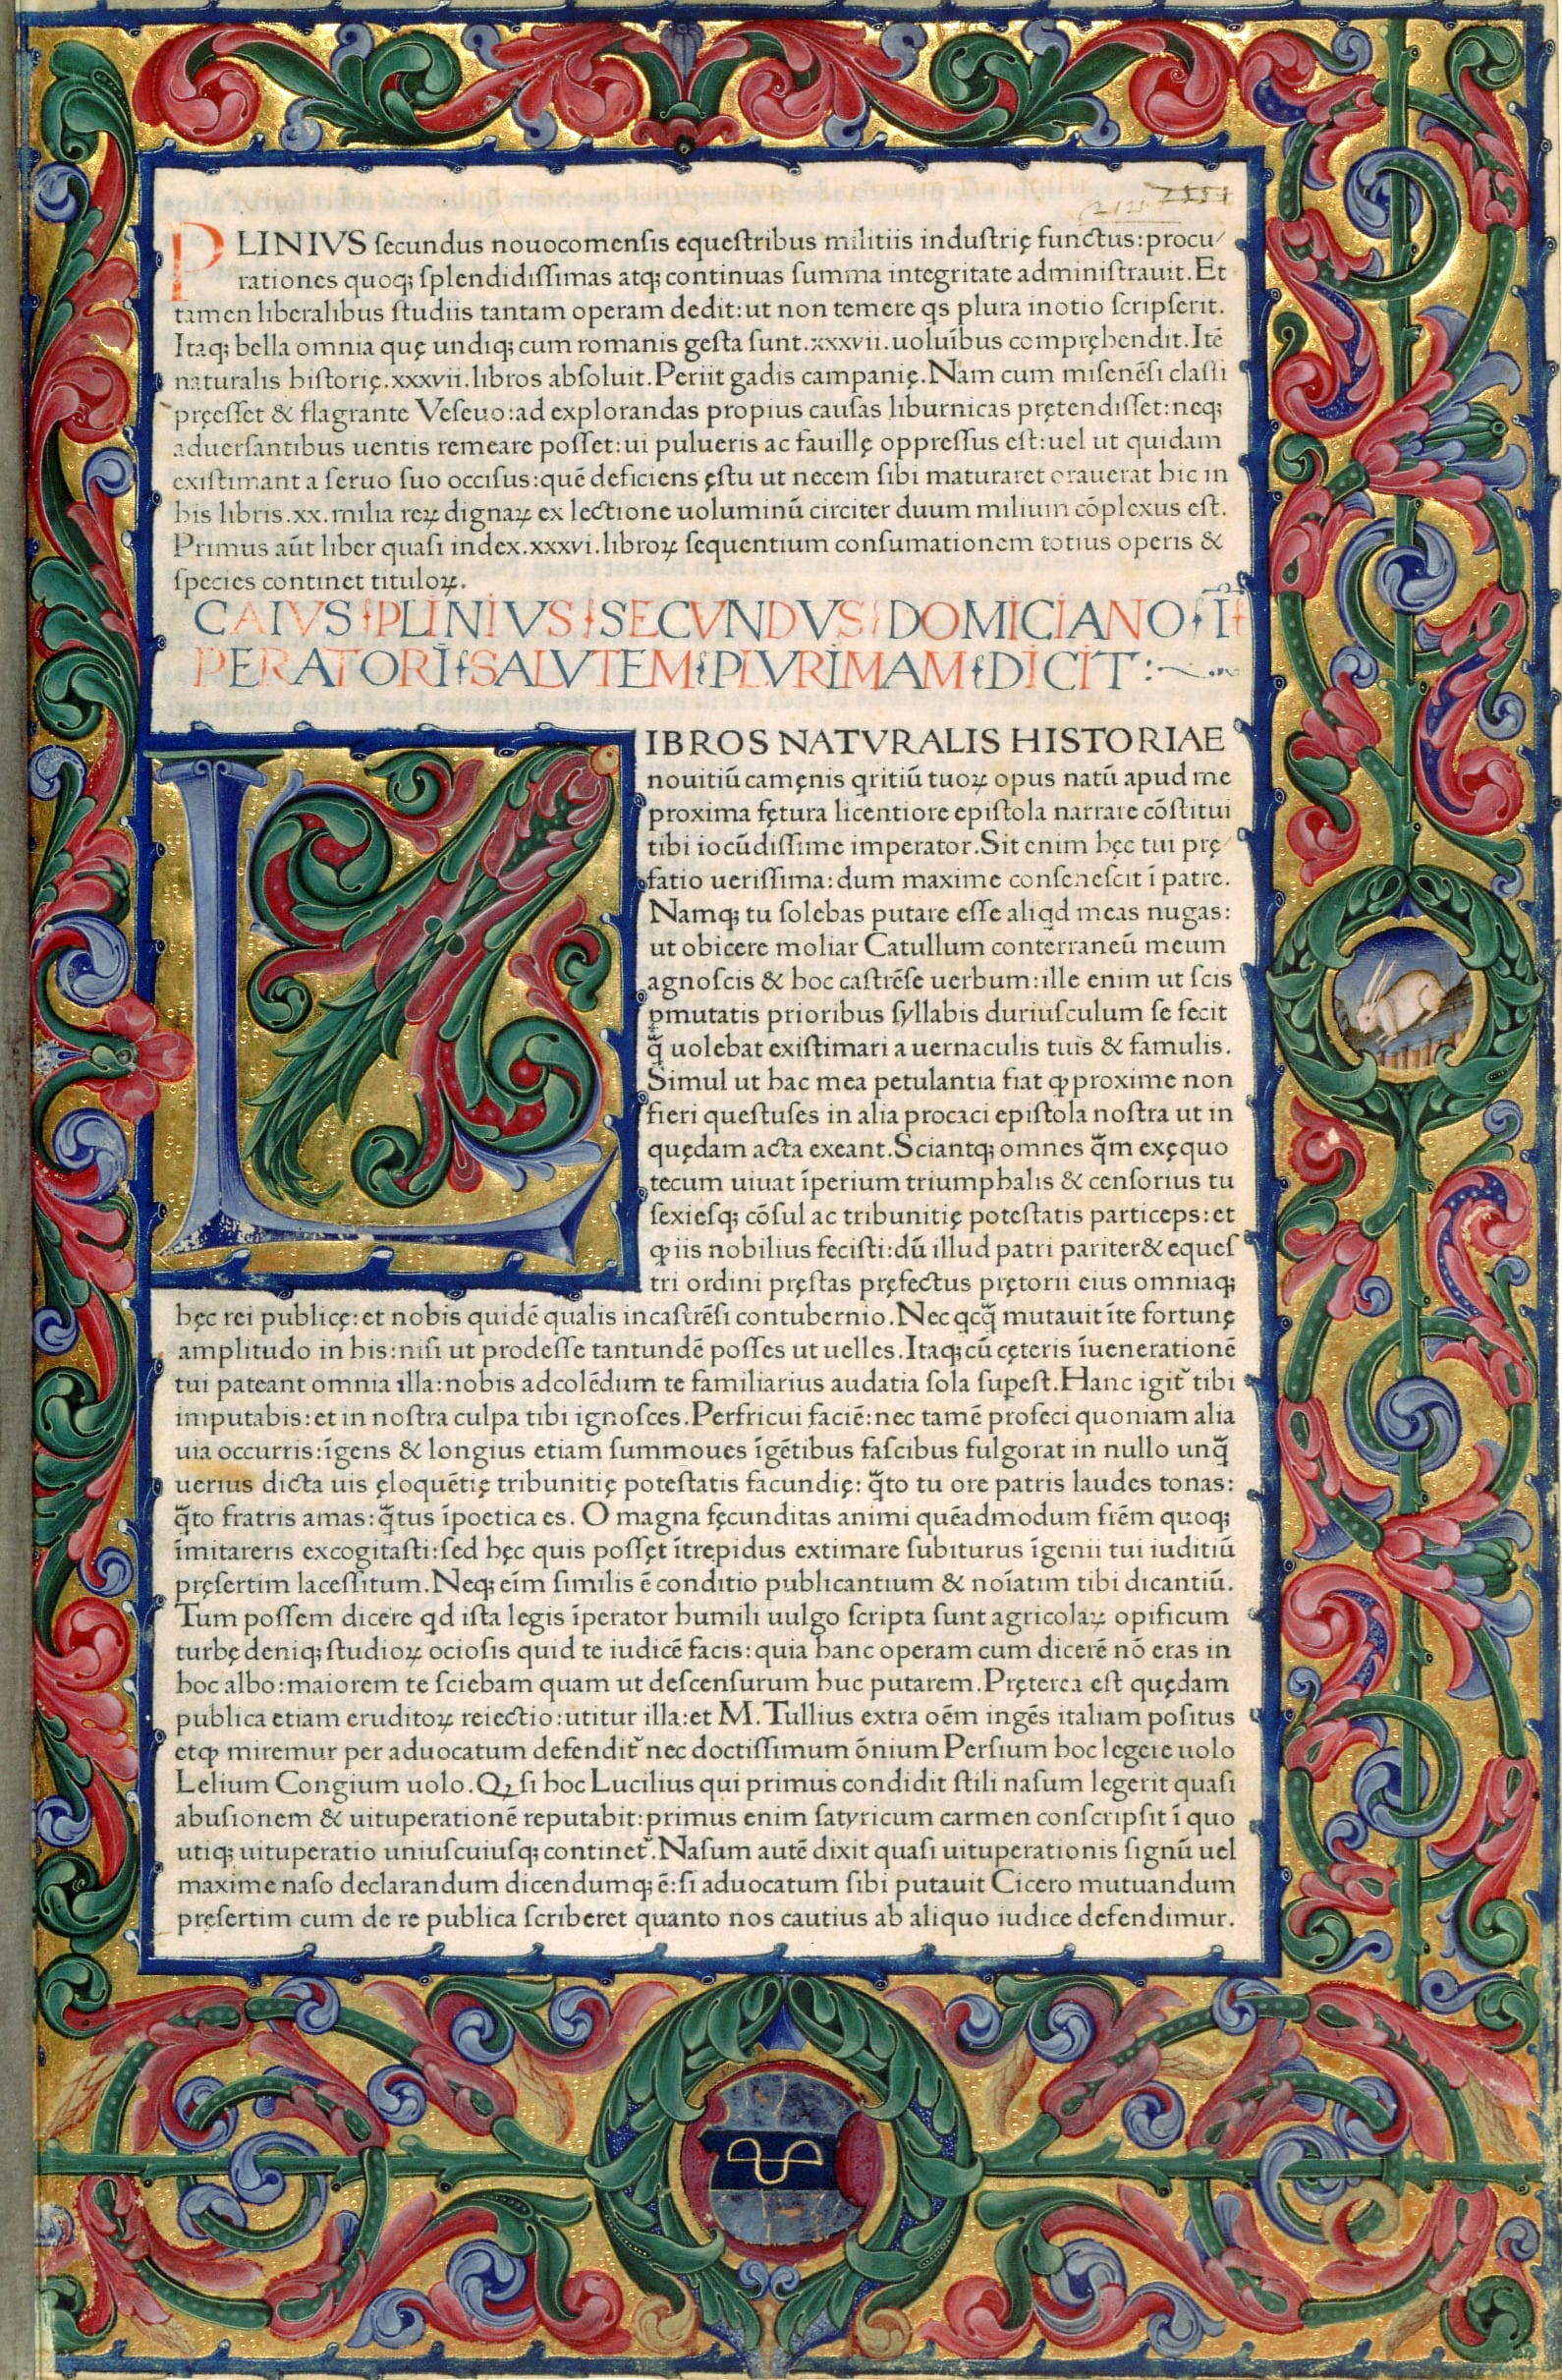 First page from the Editio Princeps of the Pliny's "Historia Naturalis" printed by Johann of Speyer. Venice, 1469. Bibliothèque Nationale de France, Réserve des livres rares, VELINS-493